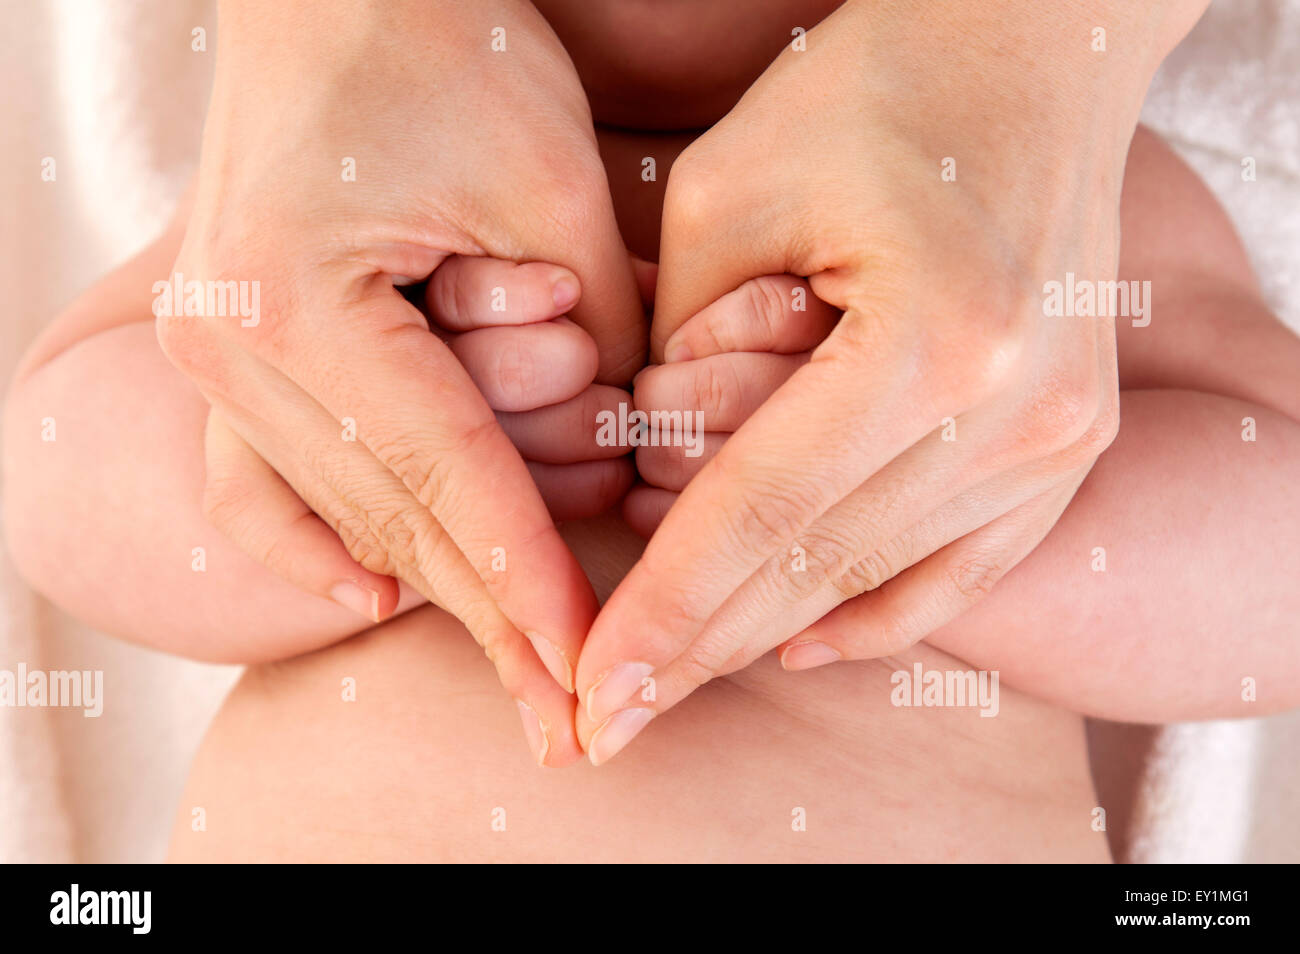 Close-up of human hands gesturing with heart shape, Stock Photo